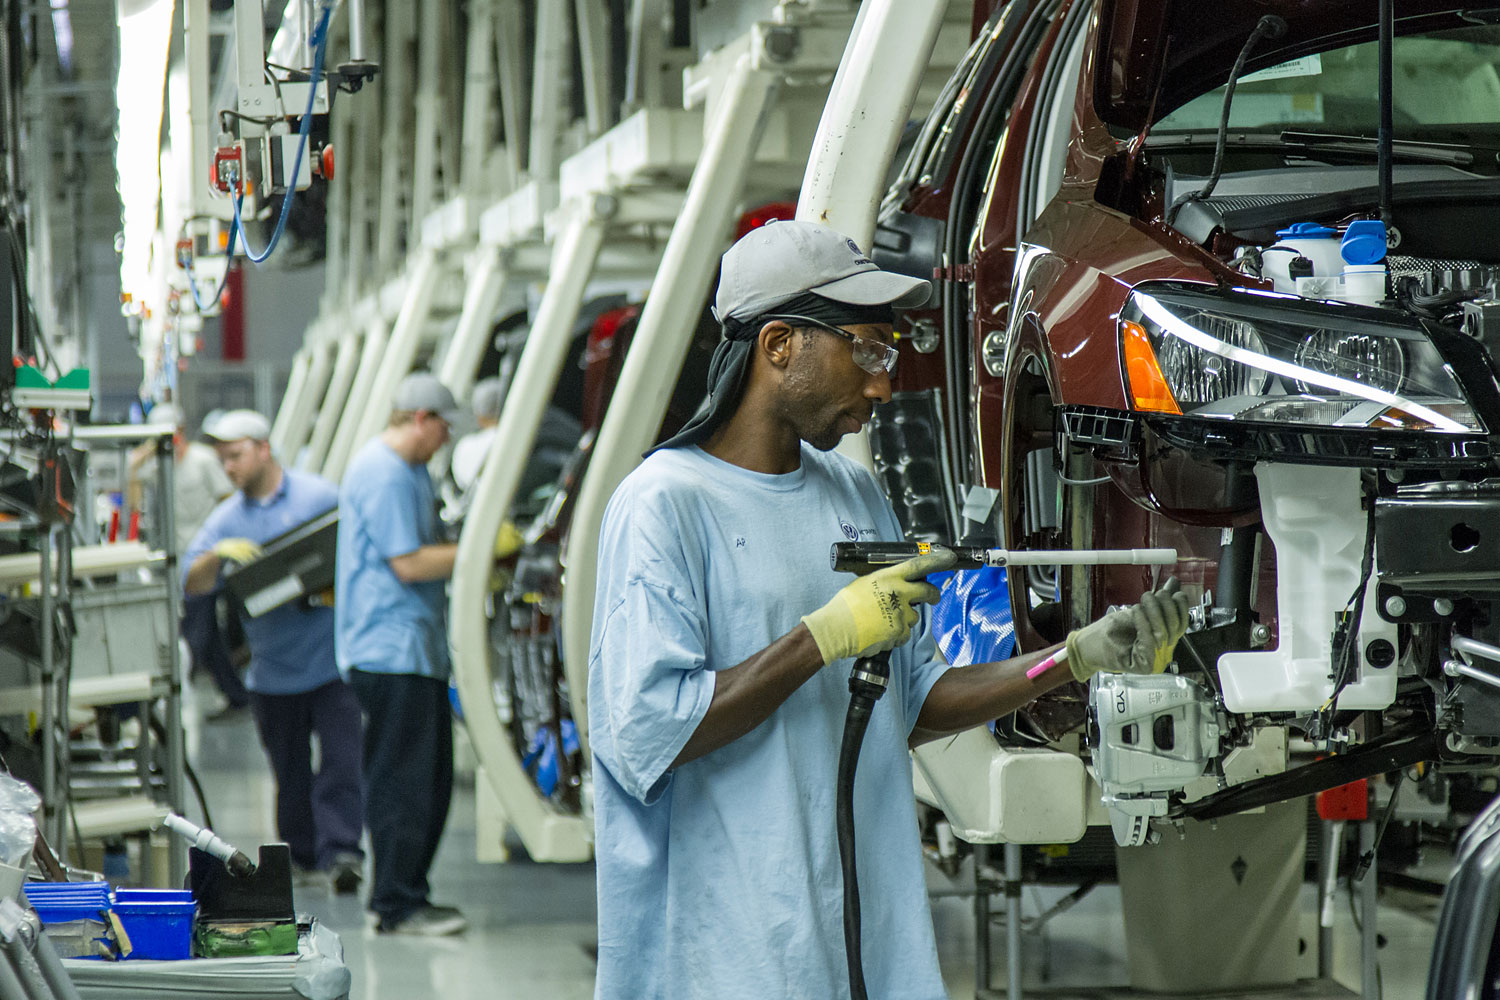 In this June 12, 2013, photo, workers assemble Volkswagen Passat sedans at the German automaker's plant in Chattanooga, Tenn.